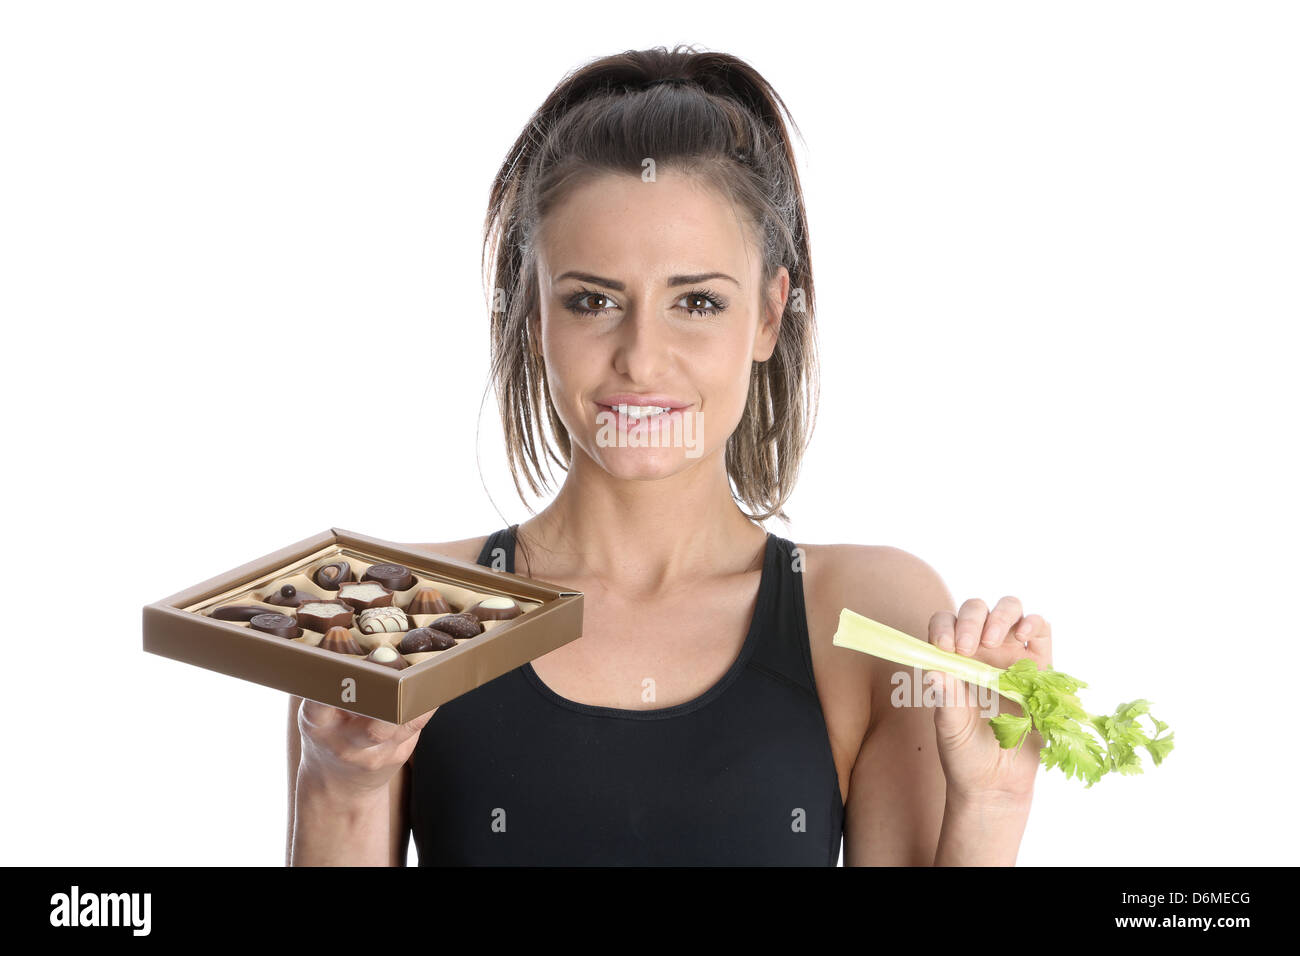 Model Released. Woman Holding Celery and Chocolates Stock Photo